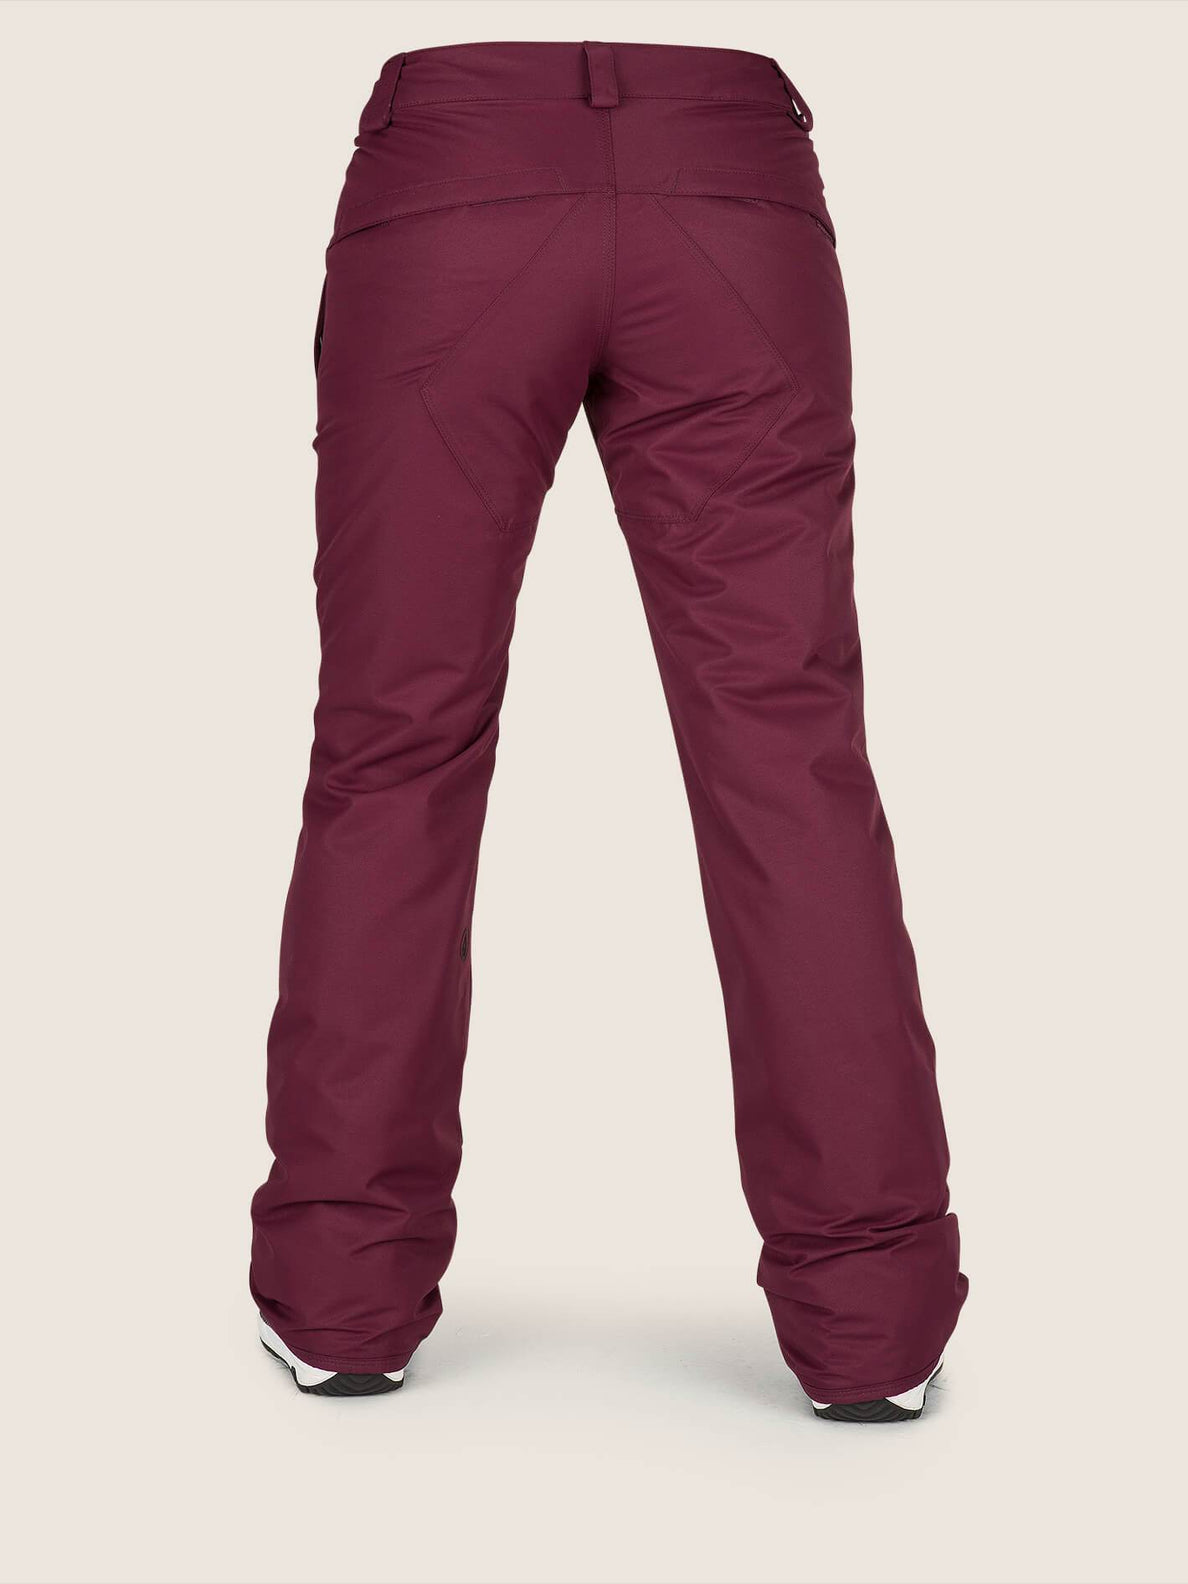 Frochickie Insulated Pants - Merlot